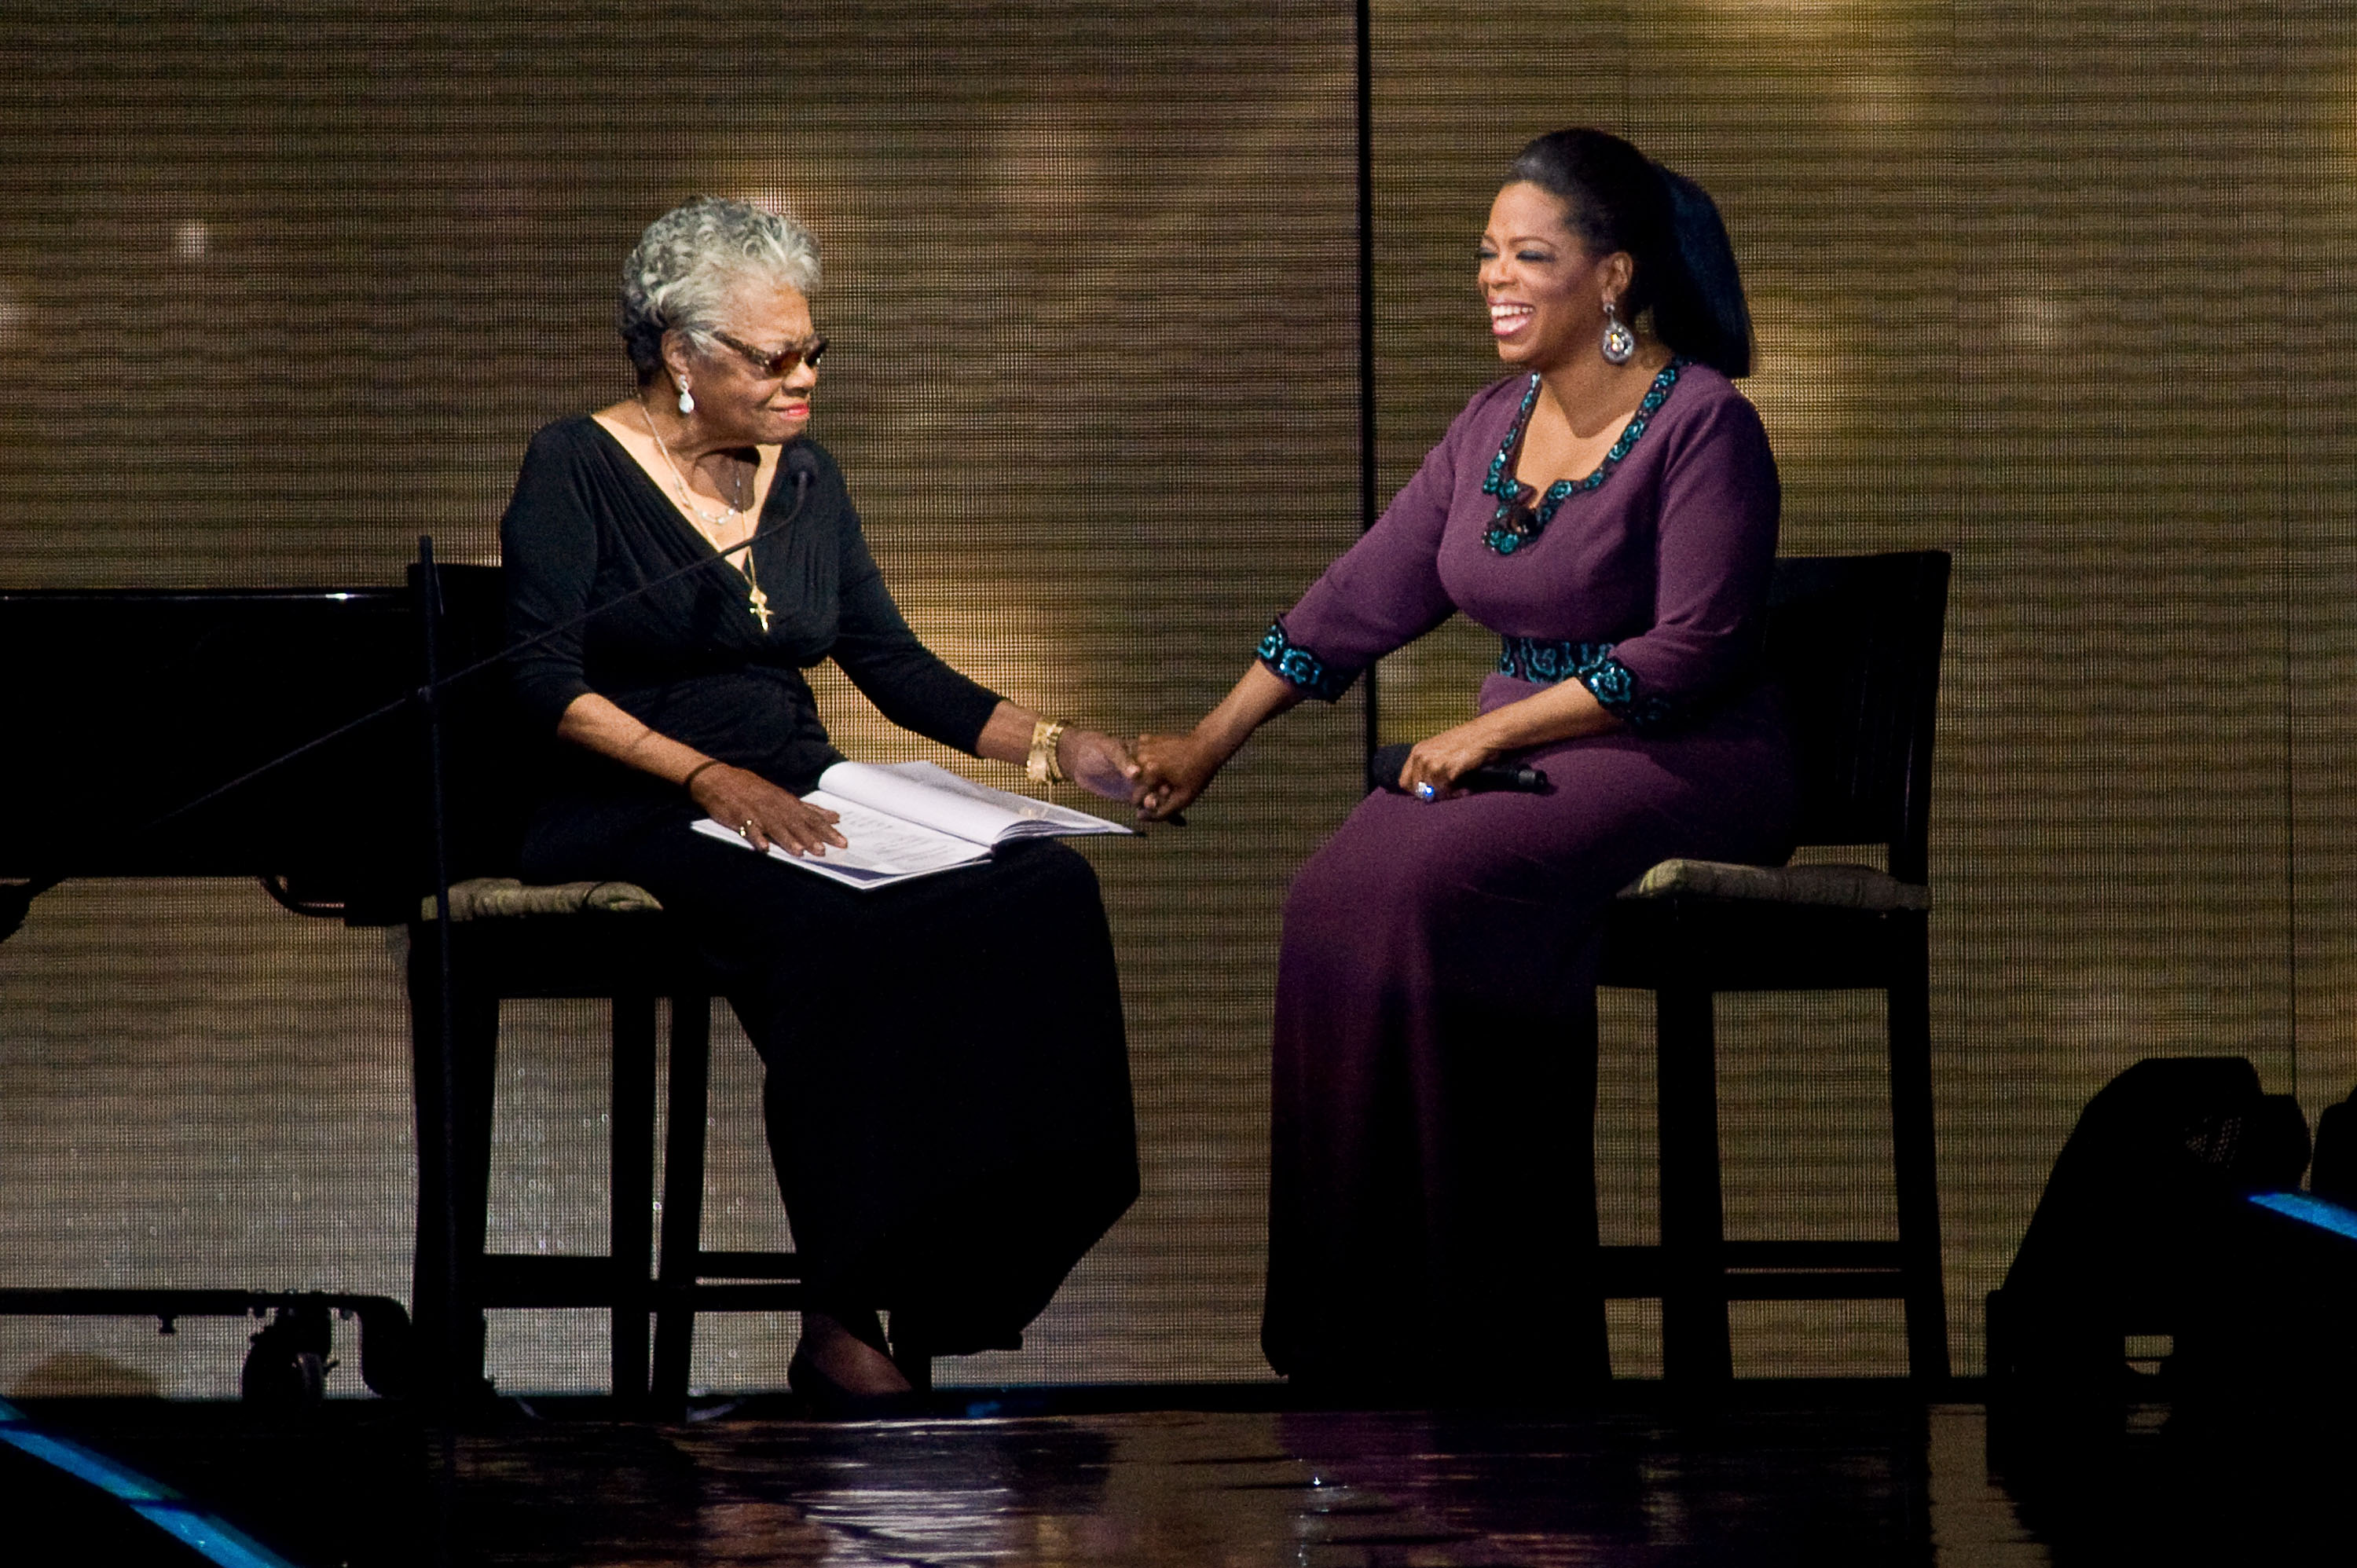 Maya Angelou and Oprah Winfrey at the "Surprise Oprah! A Farewell Spectacular" event in Chicago, Illinois on May 17, 2011 | Source: Getty Images